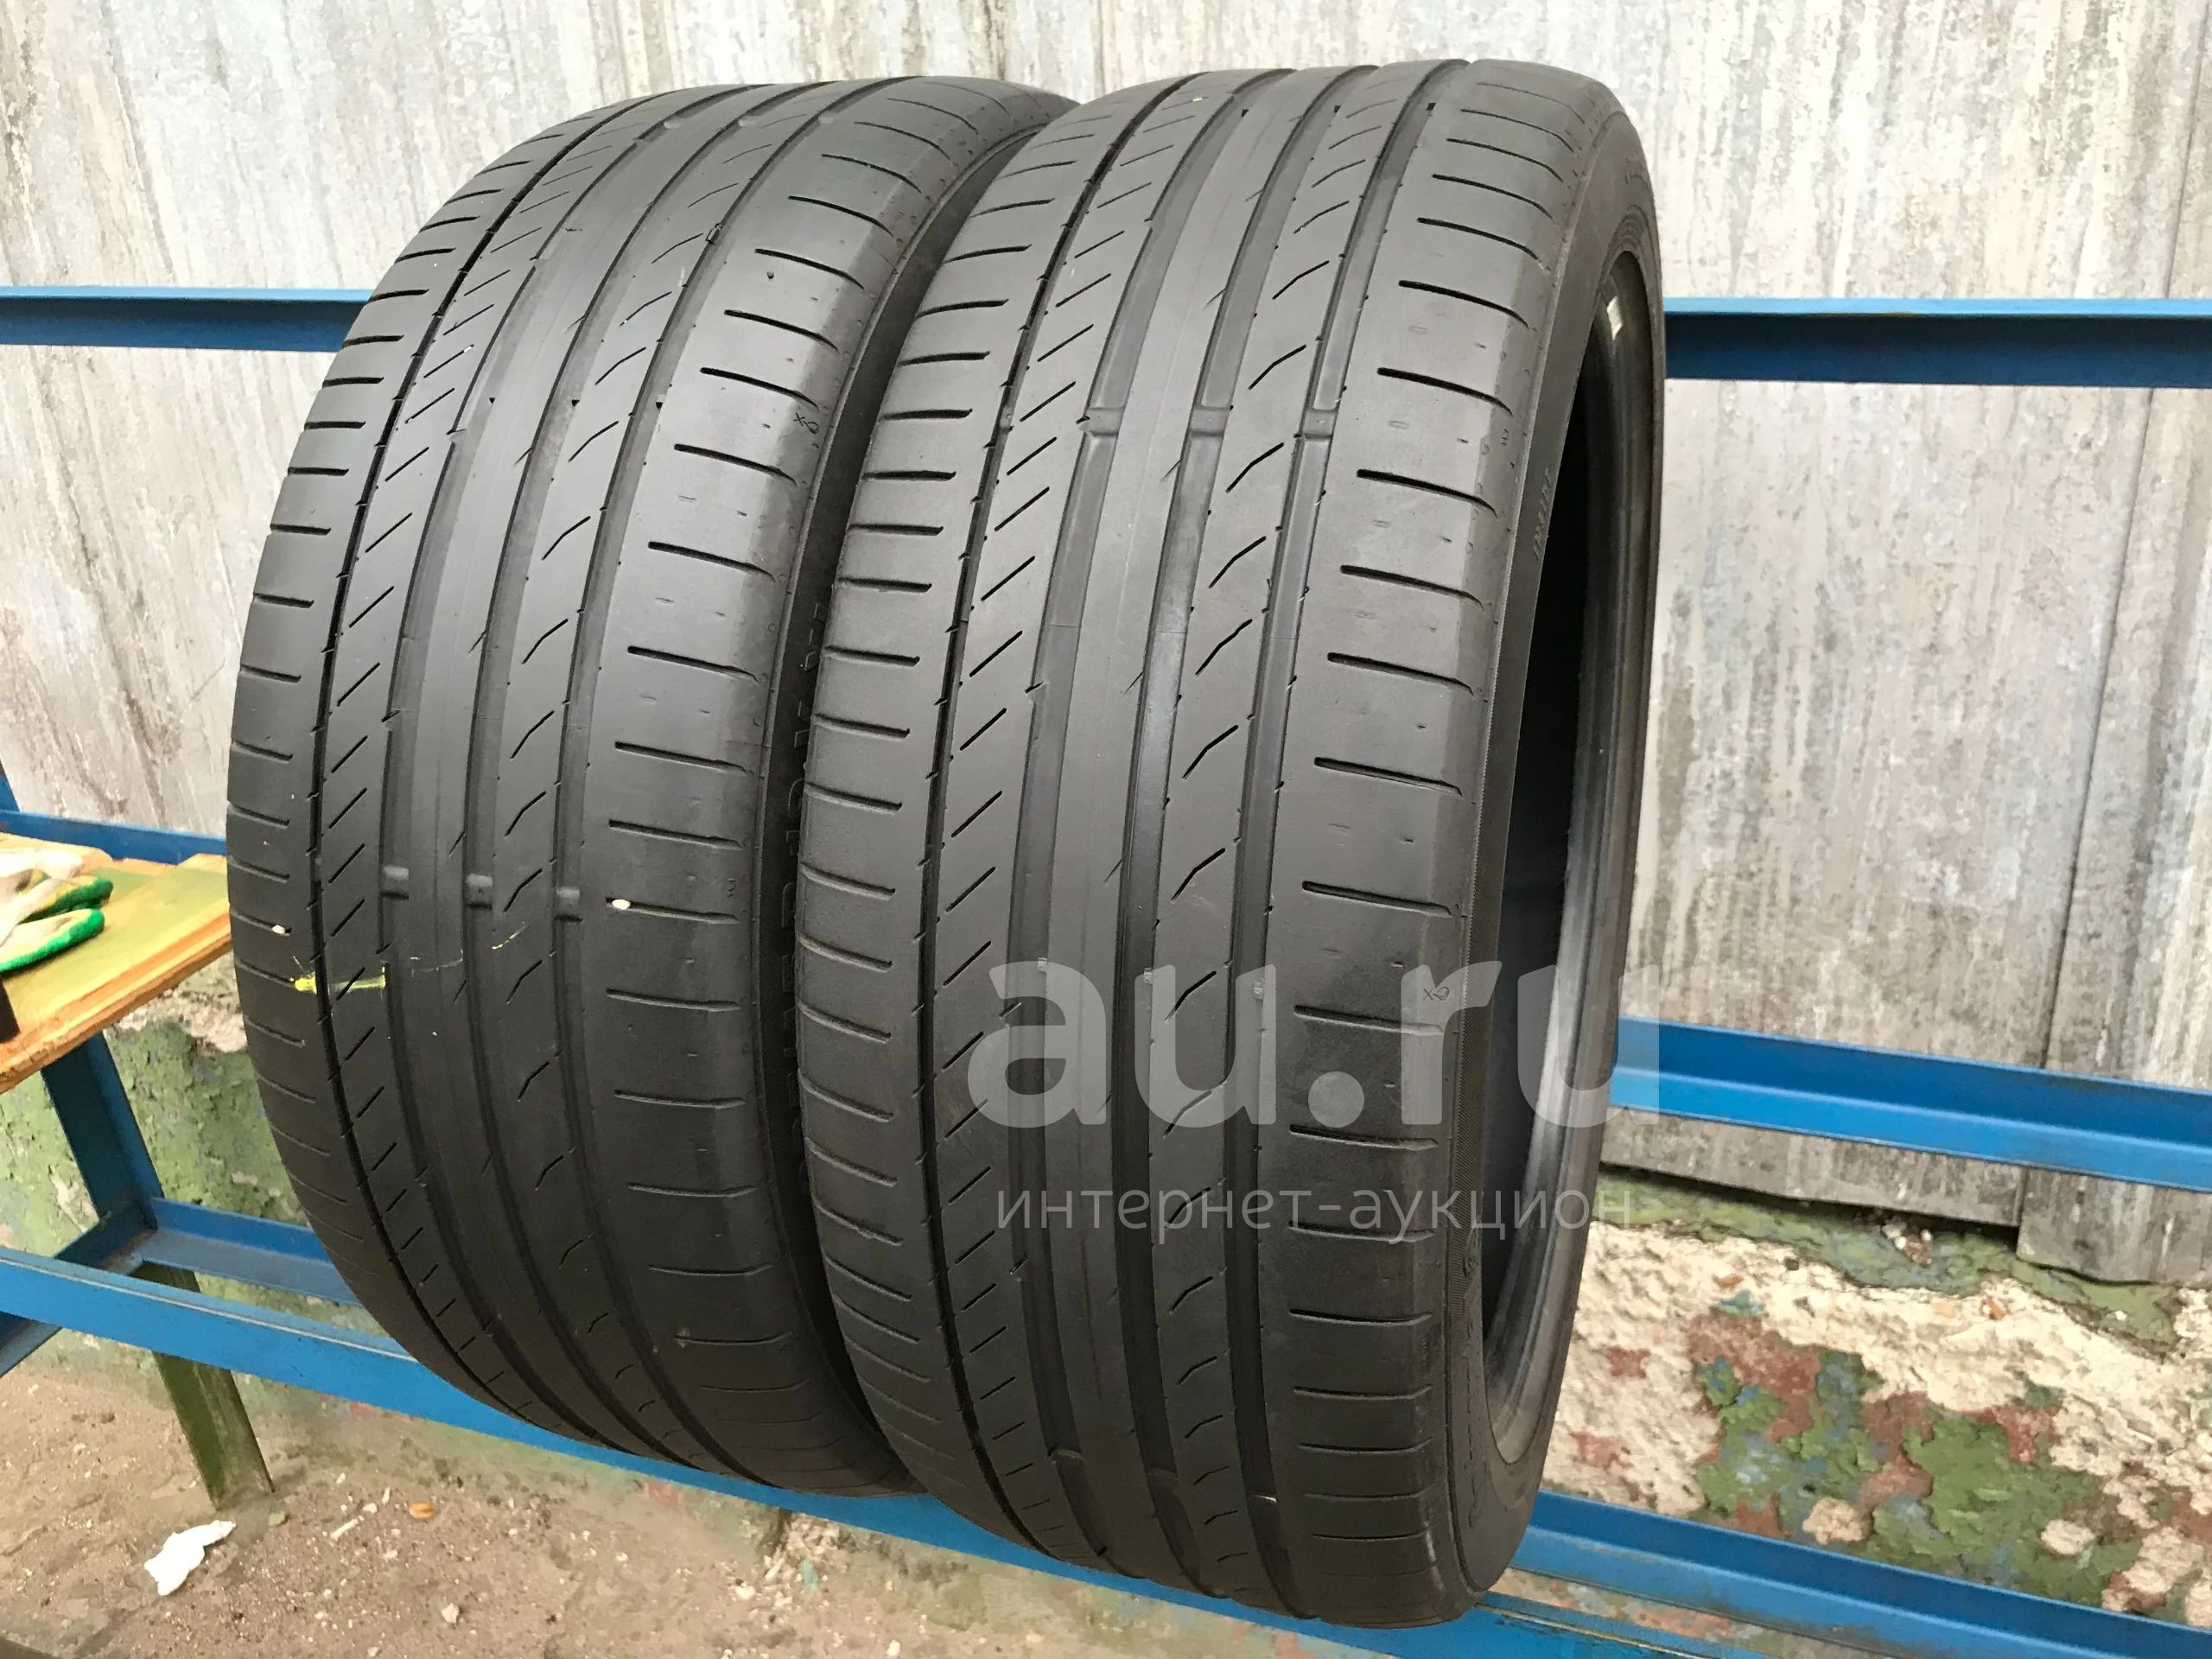 275 45 21. 275/45r21. Continental SPORTCONTACT 275/45 r21. 275 45 R21 at. Шины 275 45 21 Continental.